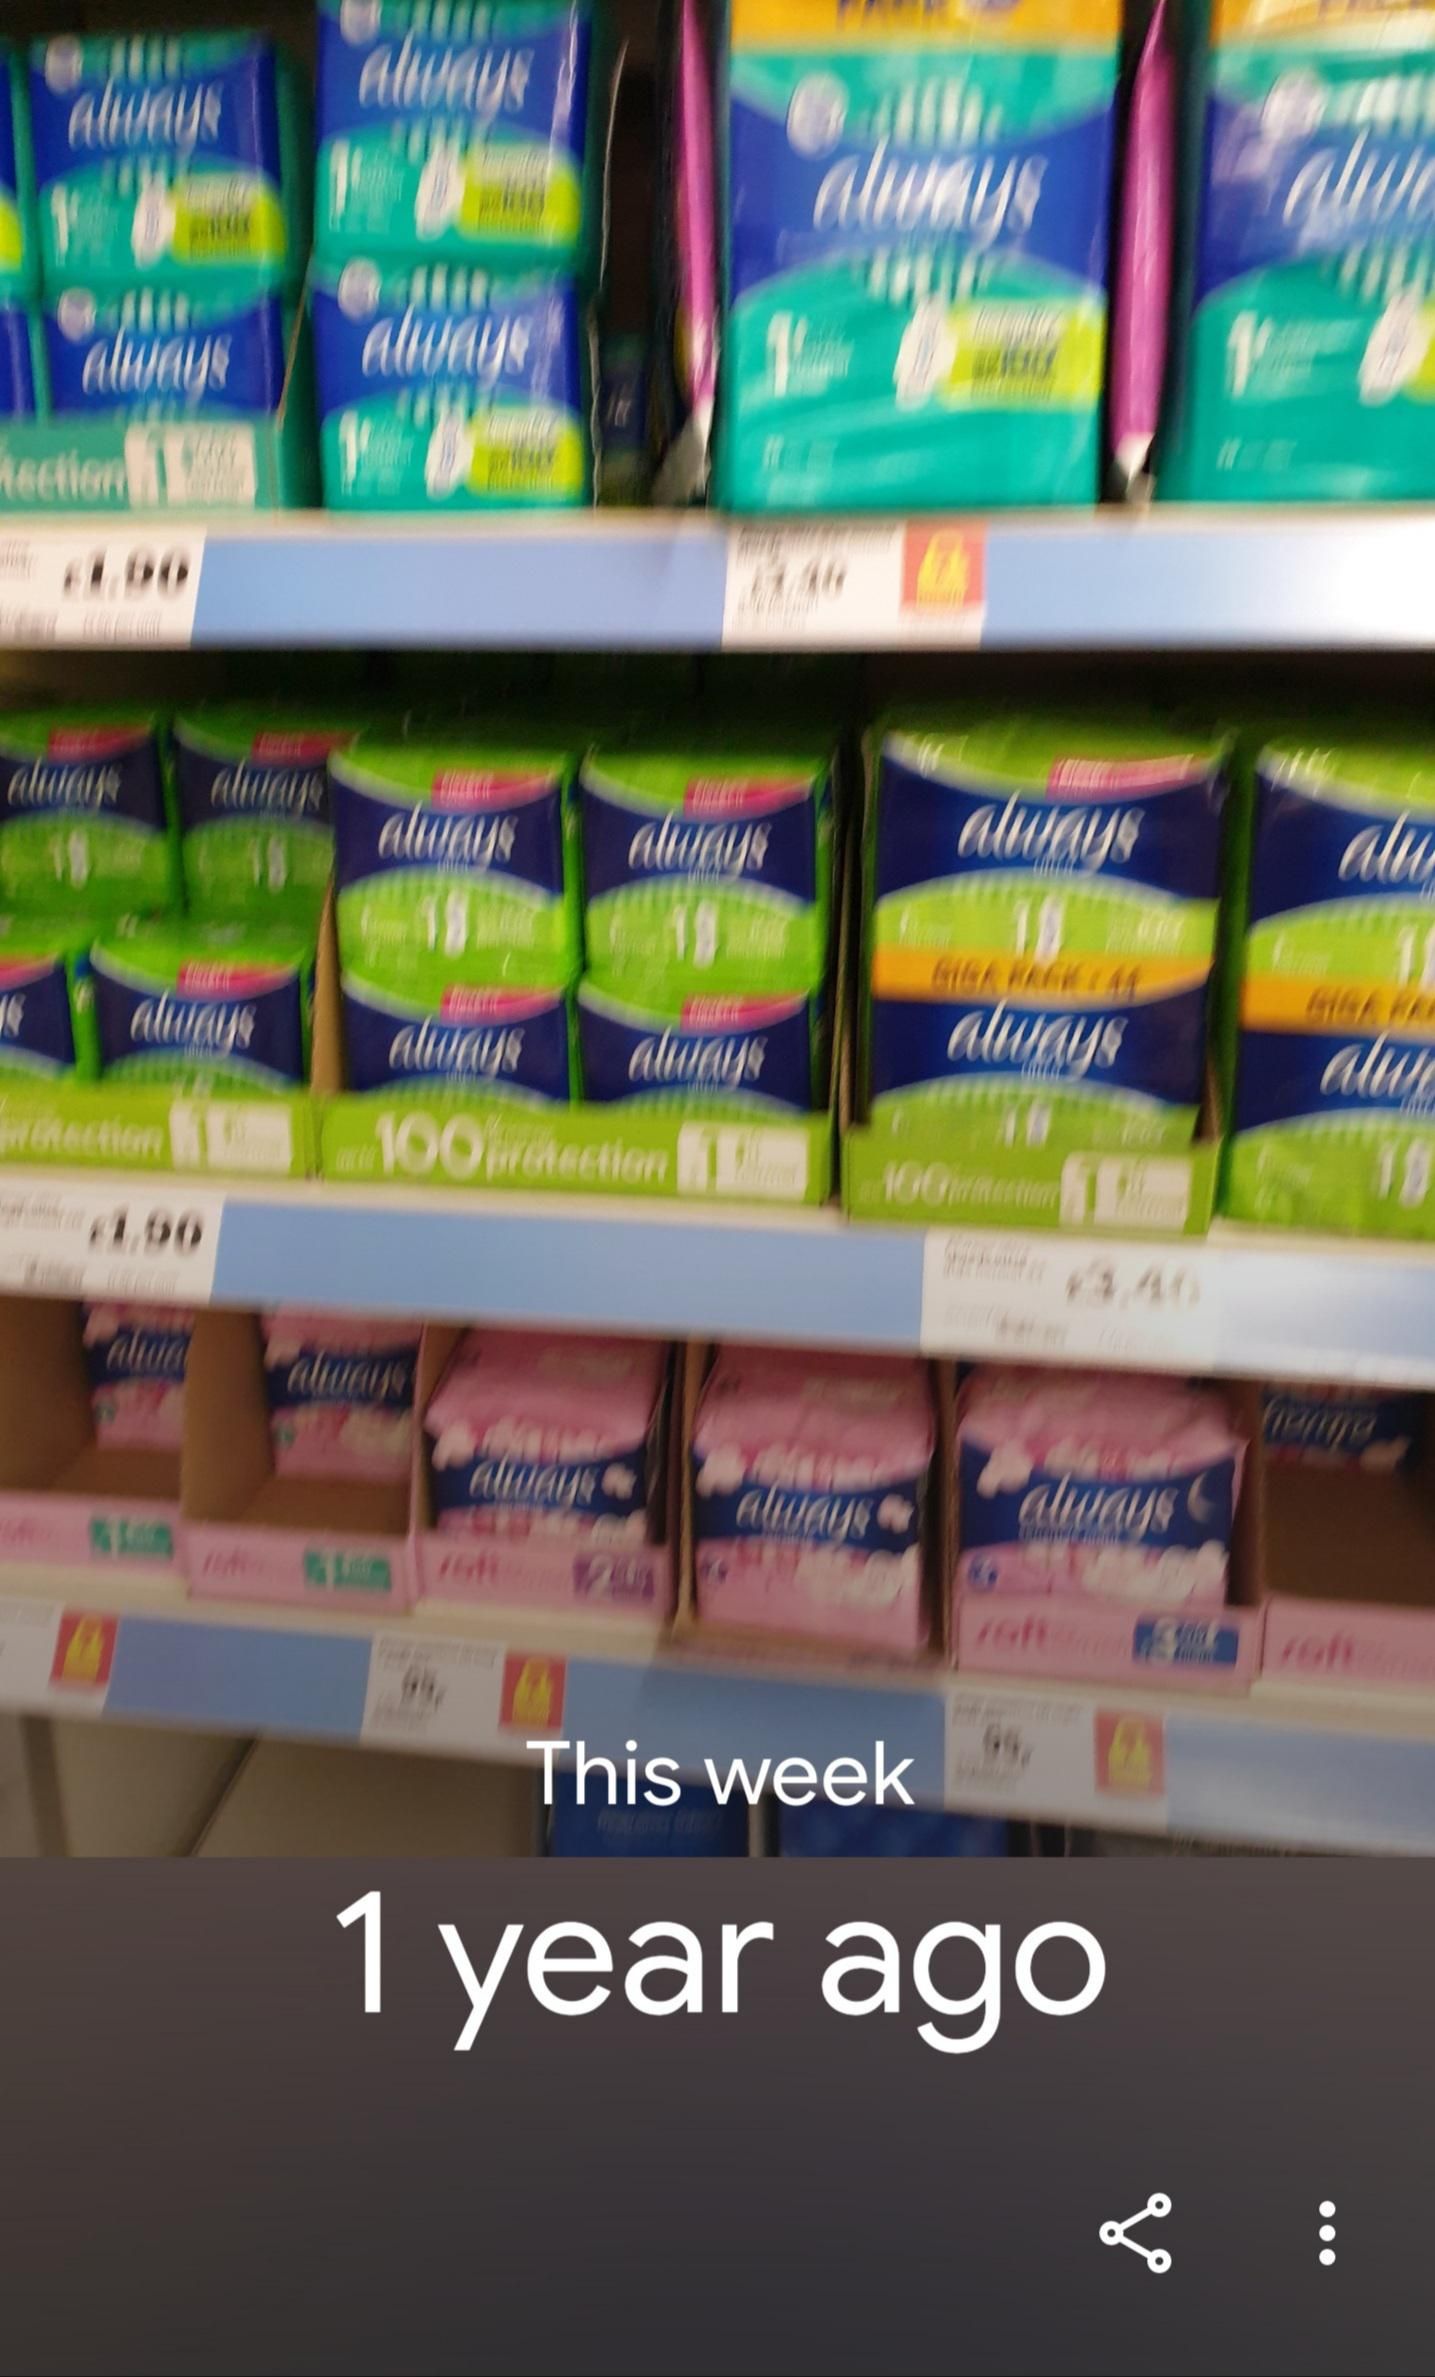 My phone sent me a one year anniversary reminder of the time I sent my wife a picture of the sanitary products, as I couldn't remember which one to buy.